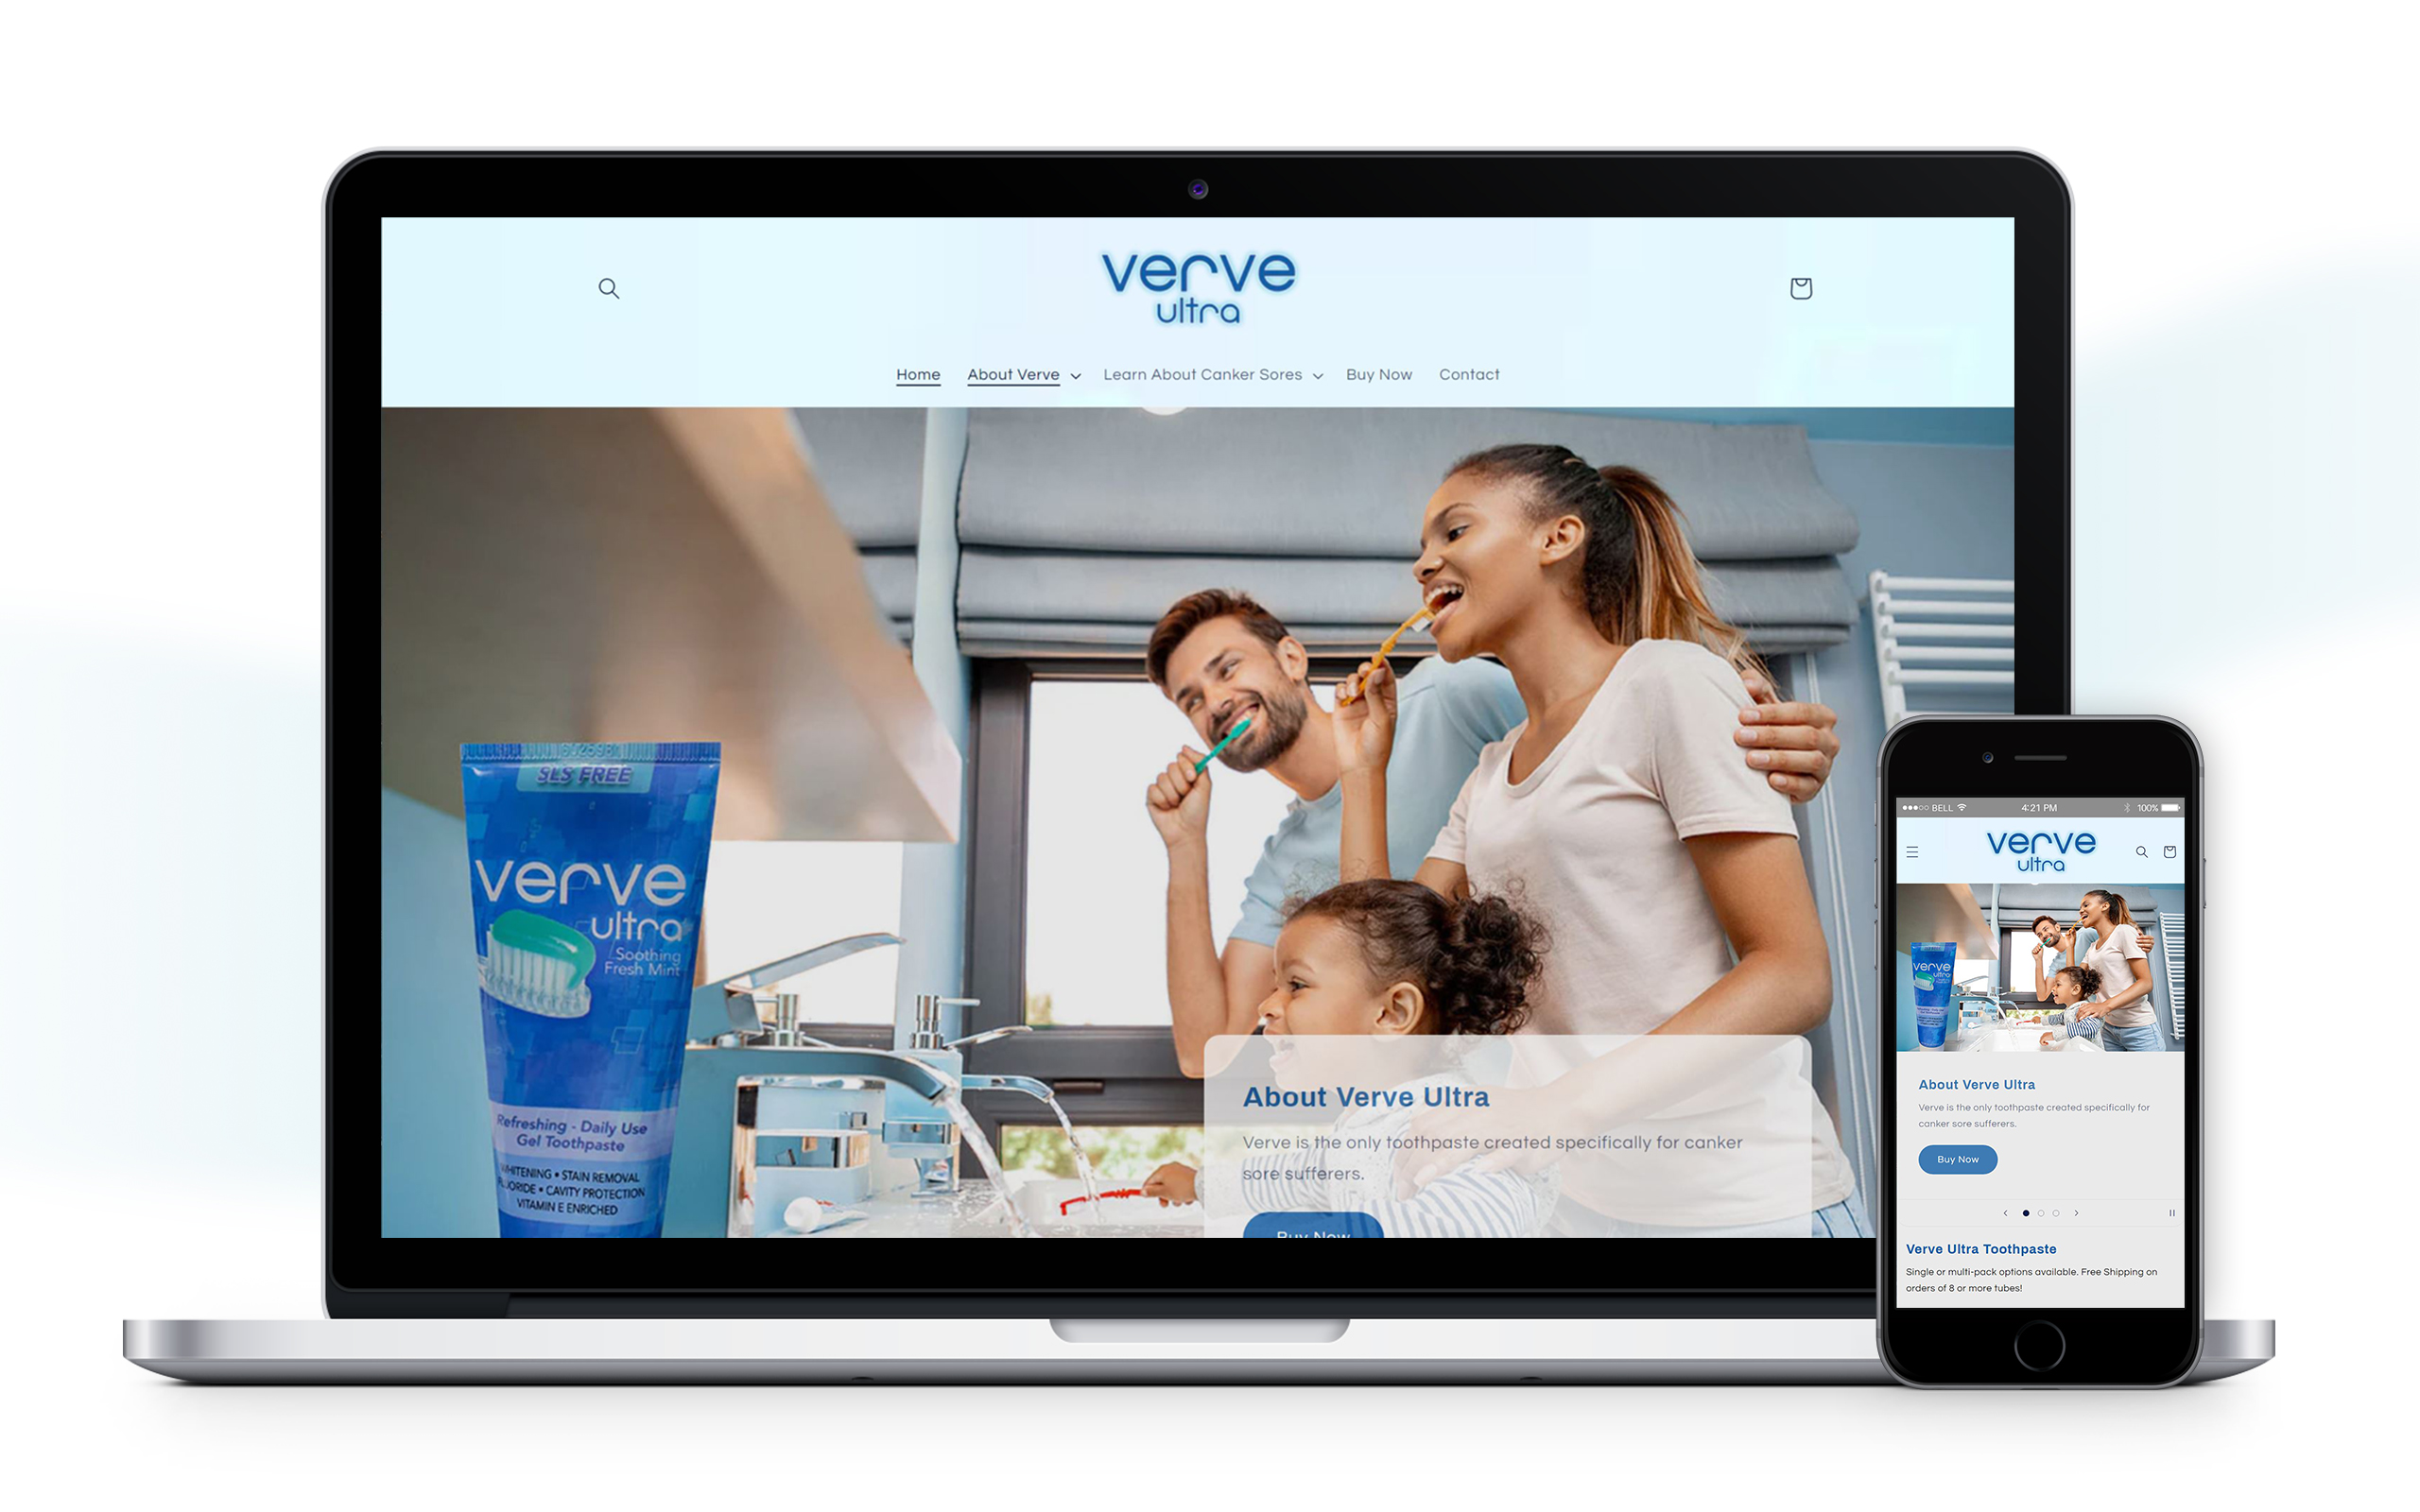 Verve Ultra Toothpaste Website Home Page